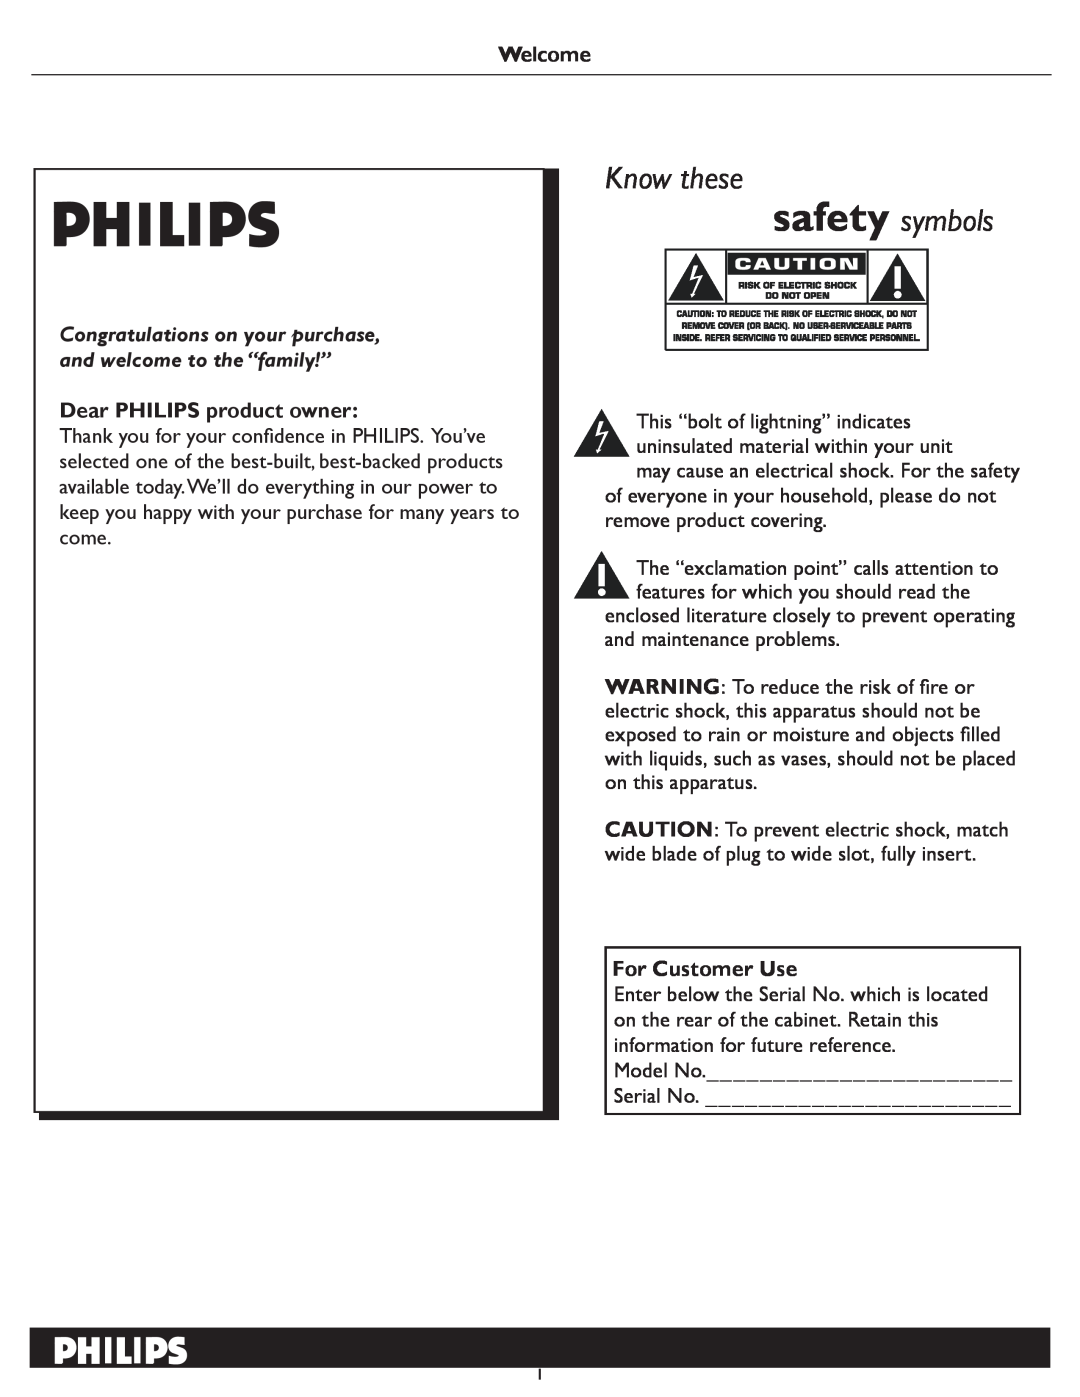 Philips 37HF7005, 47PFL7422 safety symbols, Know these, Congratulations on your purchase, and welcome to the “family!” 